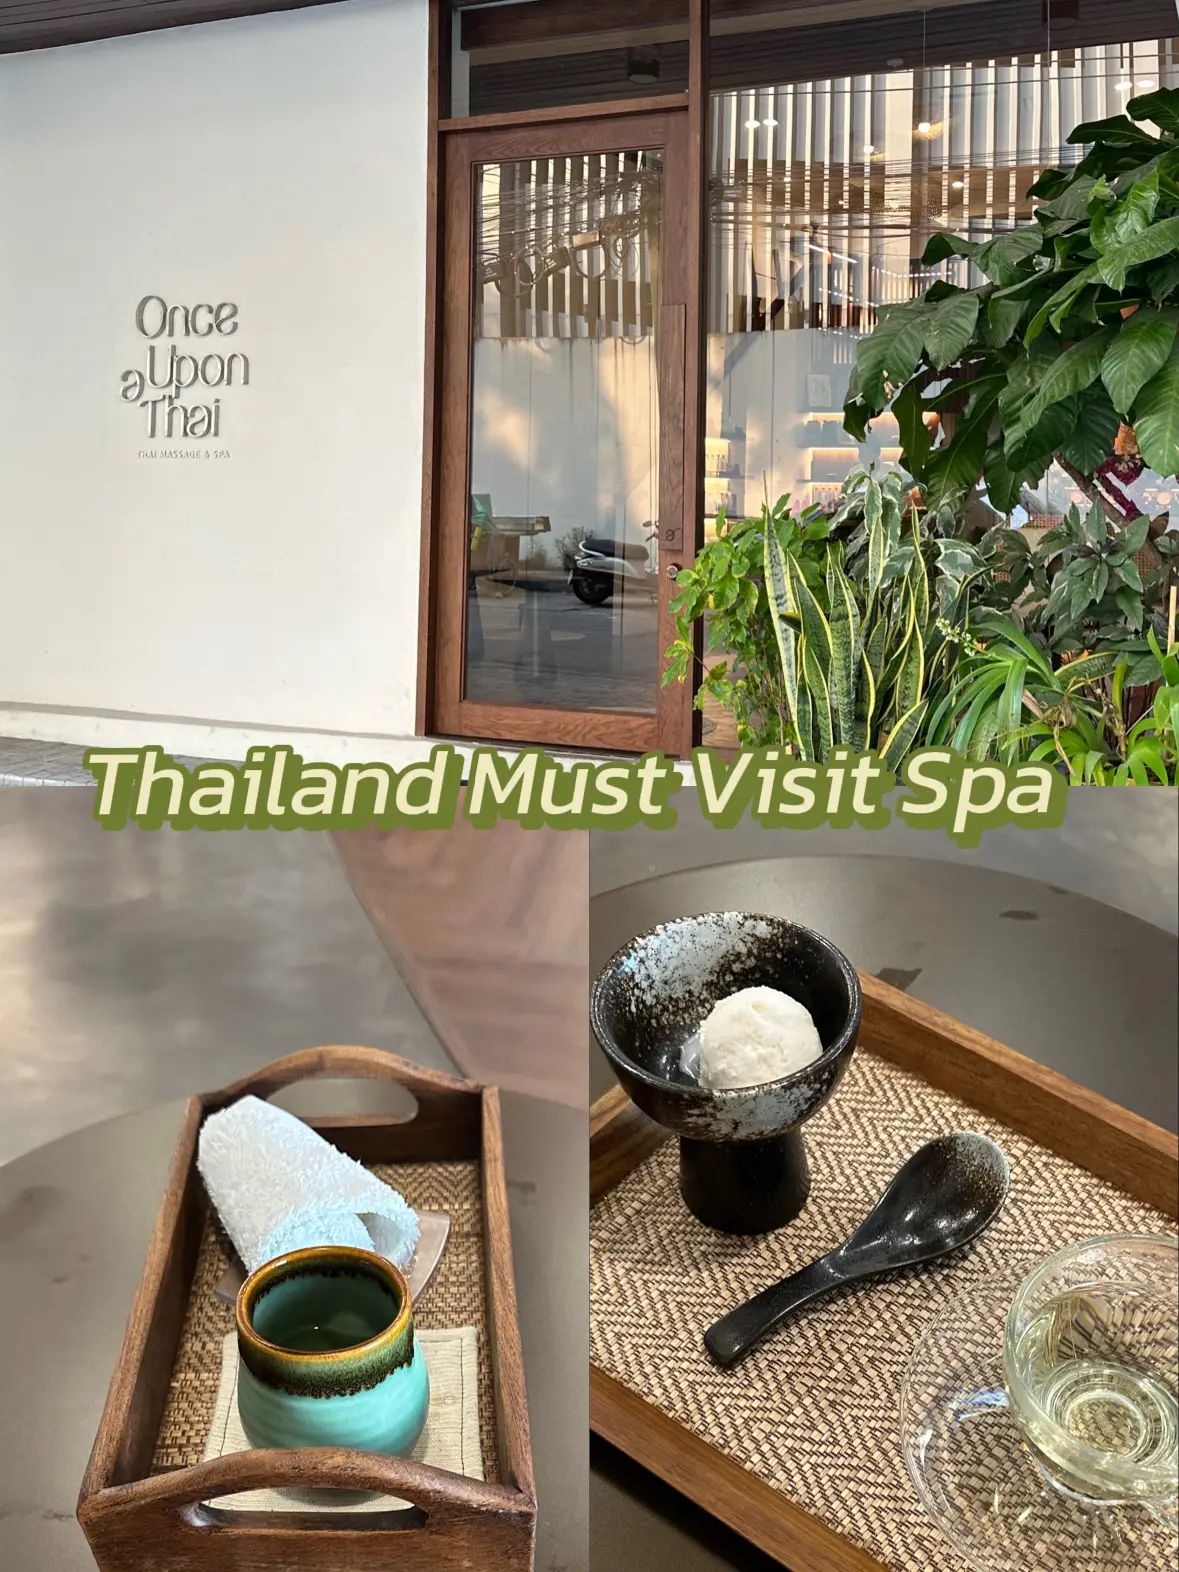 🇹🇭ONCE UPON A THAI‼️💆🏼‍♀️'s images(0)